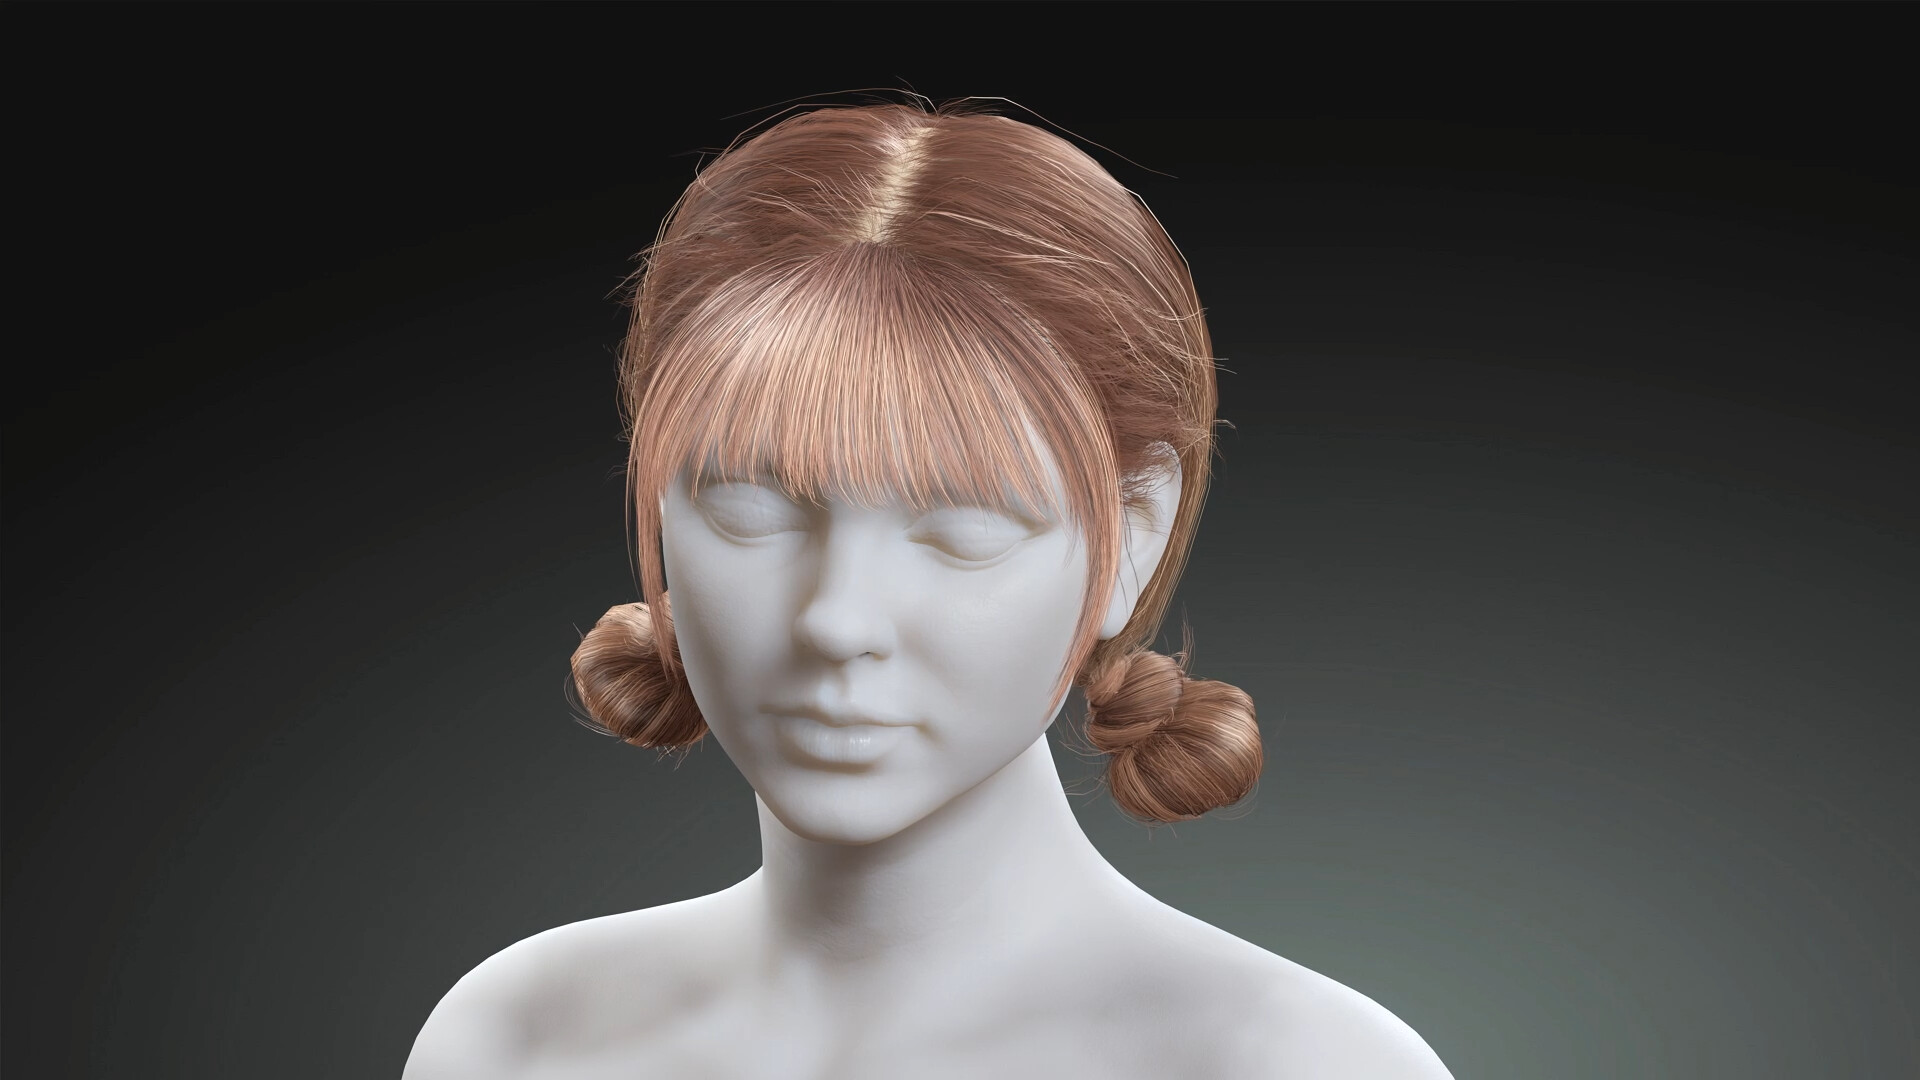 ArtStation - Female Hairstyle: Two Low Space Buns